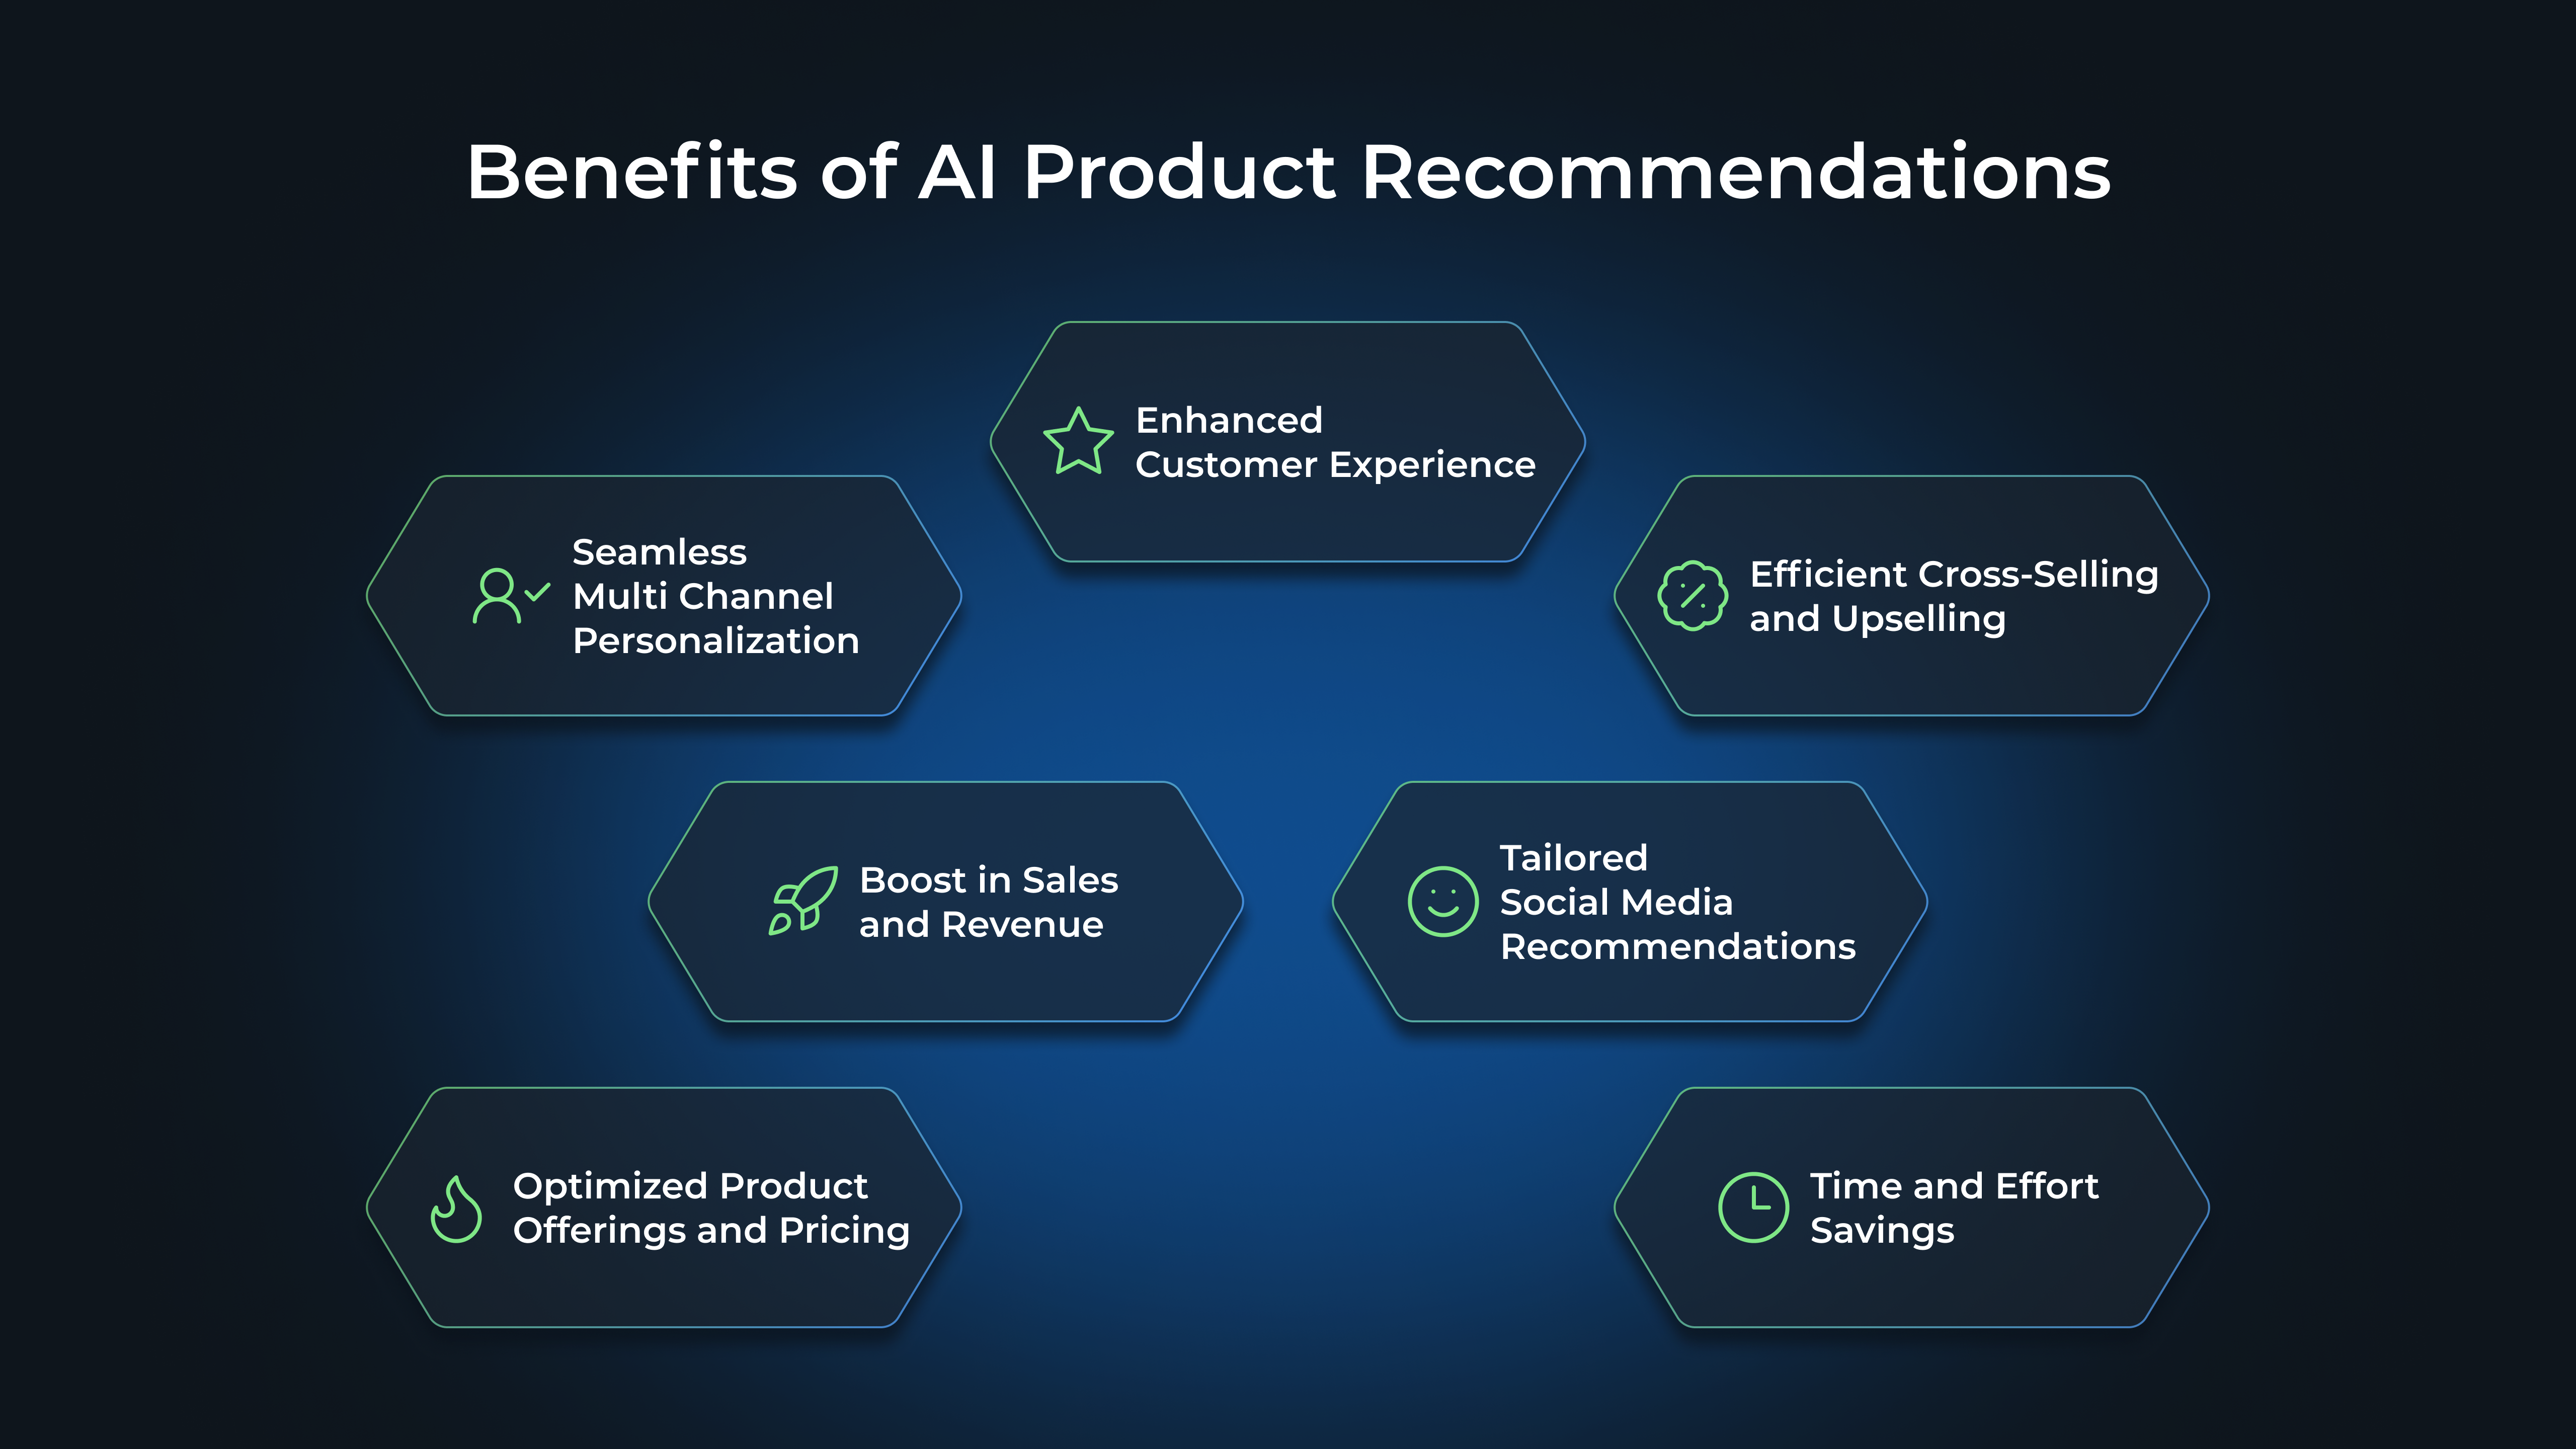 Benefits of AI Product Recommendations: Enhanced Customer Experience, Seamless Multi Channel Personalization, Boost in Sales and Revenue, Optimized Product Offerings and Pricing, Efficient Cross-Selling and Upselling, Tailored Social Media Recommendations, Time and Effort Savings
